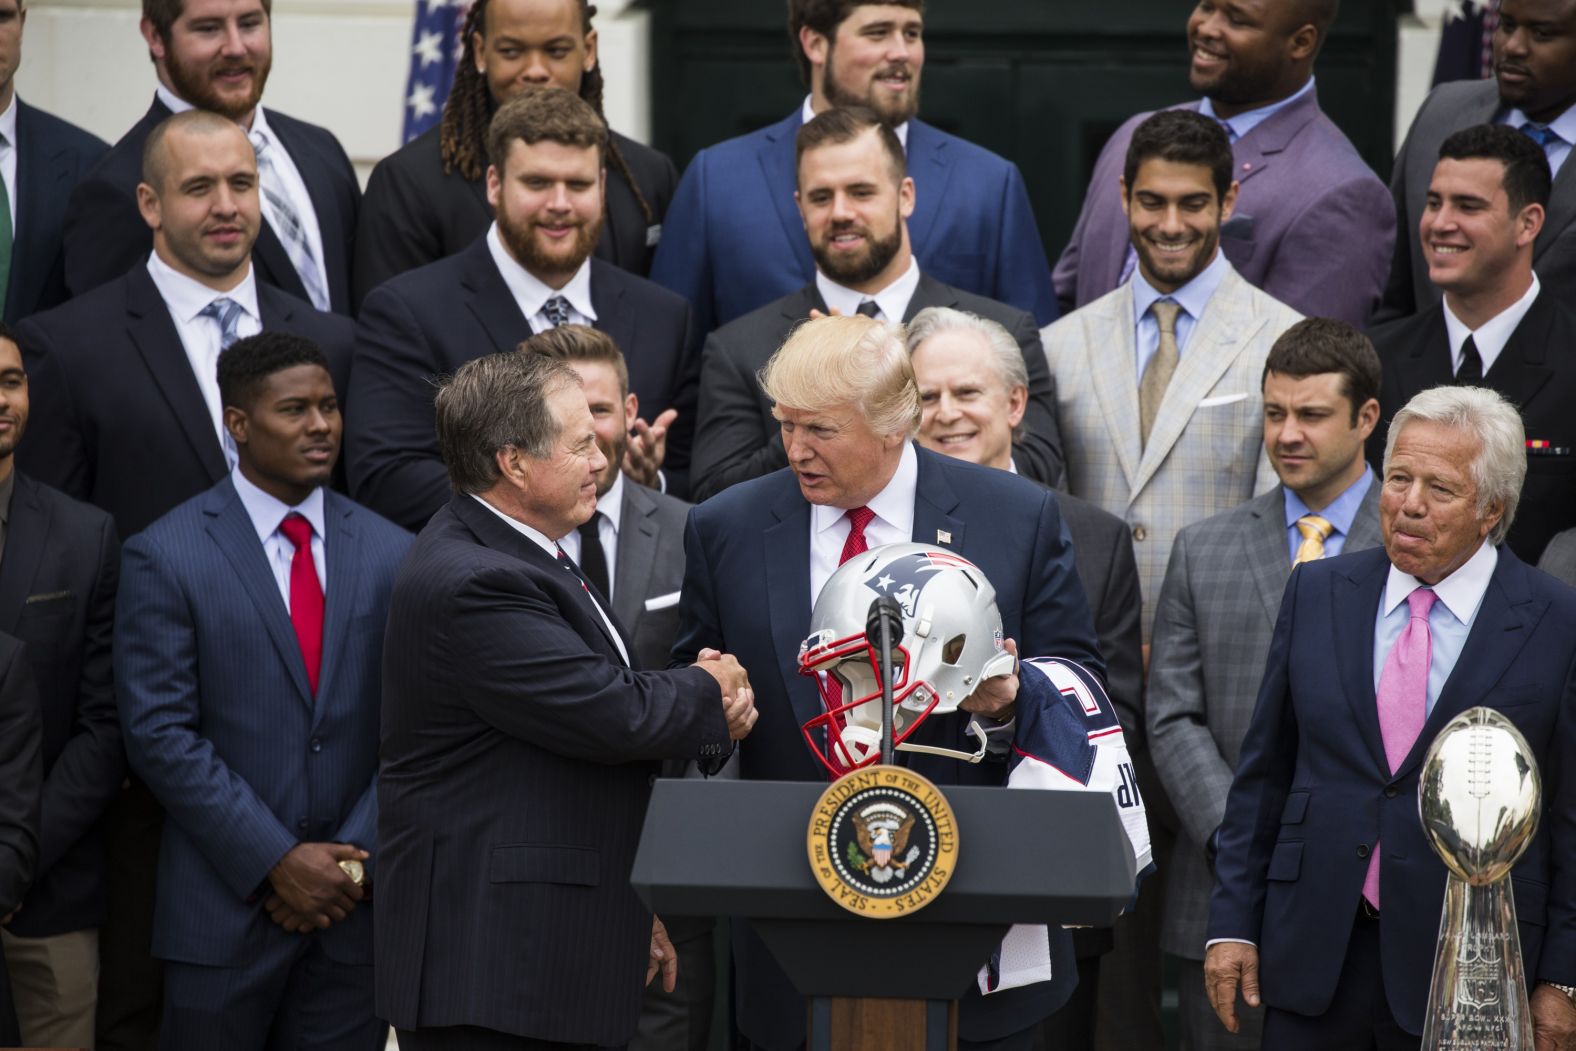 Belichick presents President Donald Trump with an official Super Bowl helmet at the White House in 2017. The Patriots were coming off one of their most famous Super Bowl wins — when they rallied from a 28-3 deficit to defeat the Atlanta Falcons 34-28. It was the largest comeback in Super Bowl history.